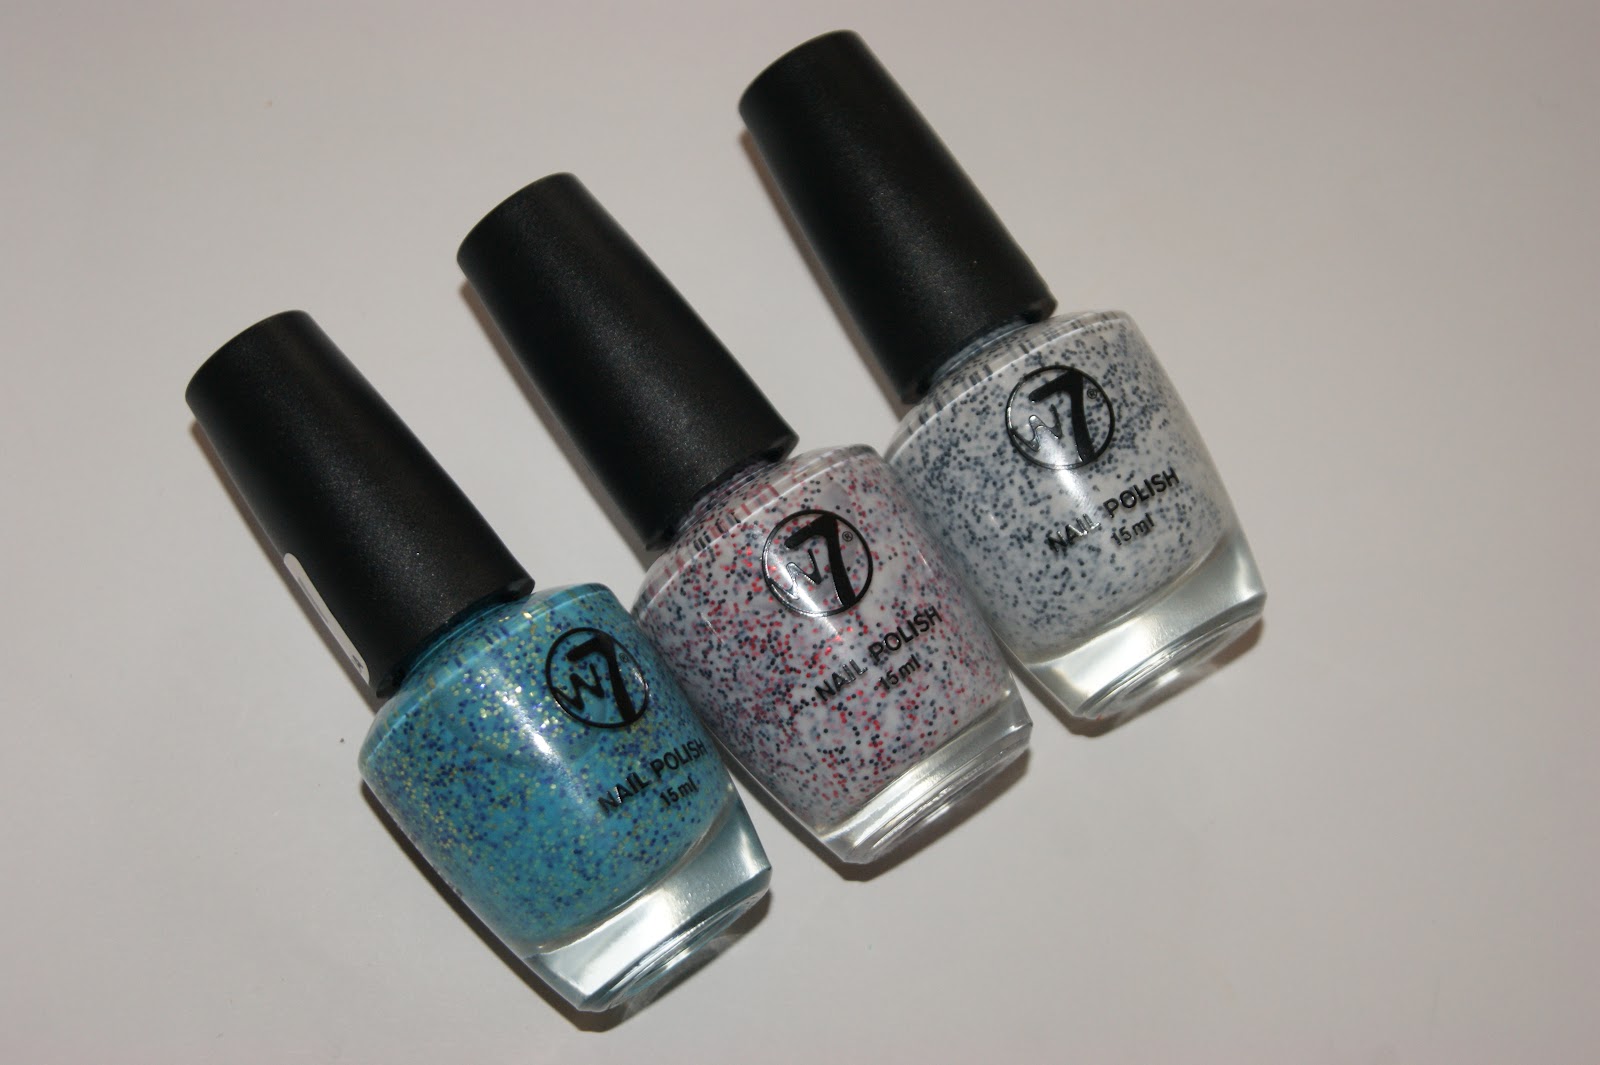 W7 New Glitter Polishes (Sprinkle Effect) - Review | The Sunday Girl